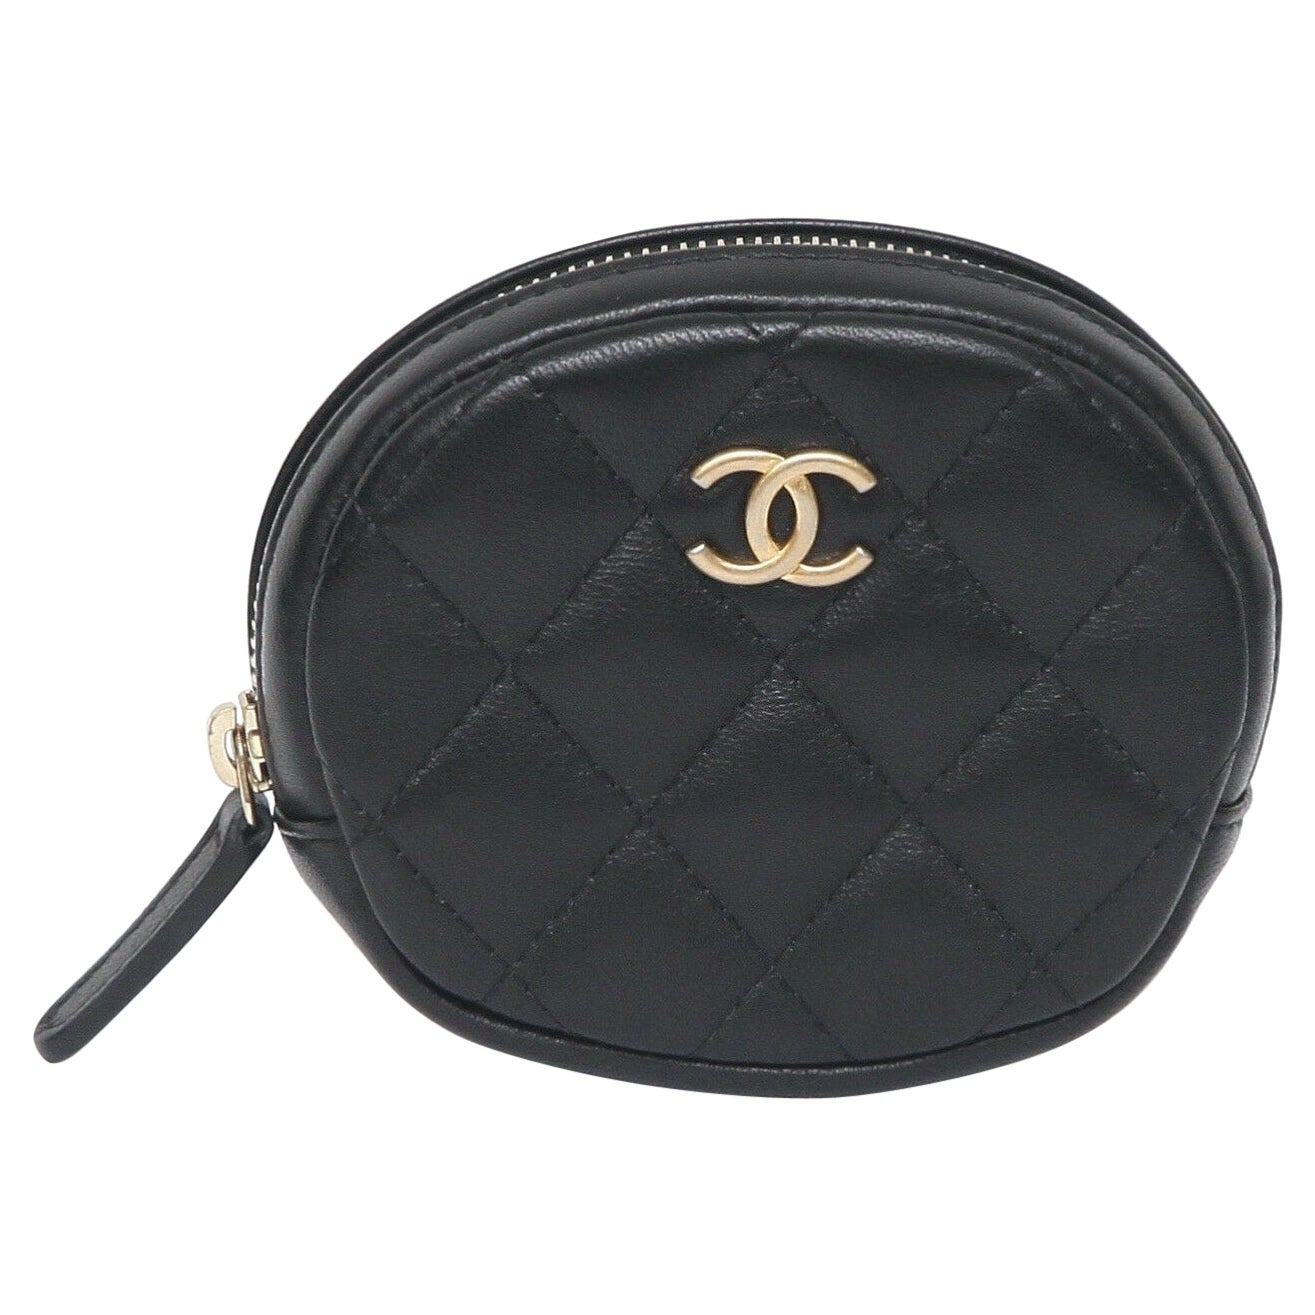  CHANEL Classic Zipped Coin Purse Beige with Gold Hardware  Chanel  coin purse Chanel wallet small Coin purse